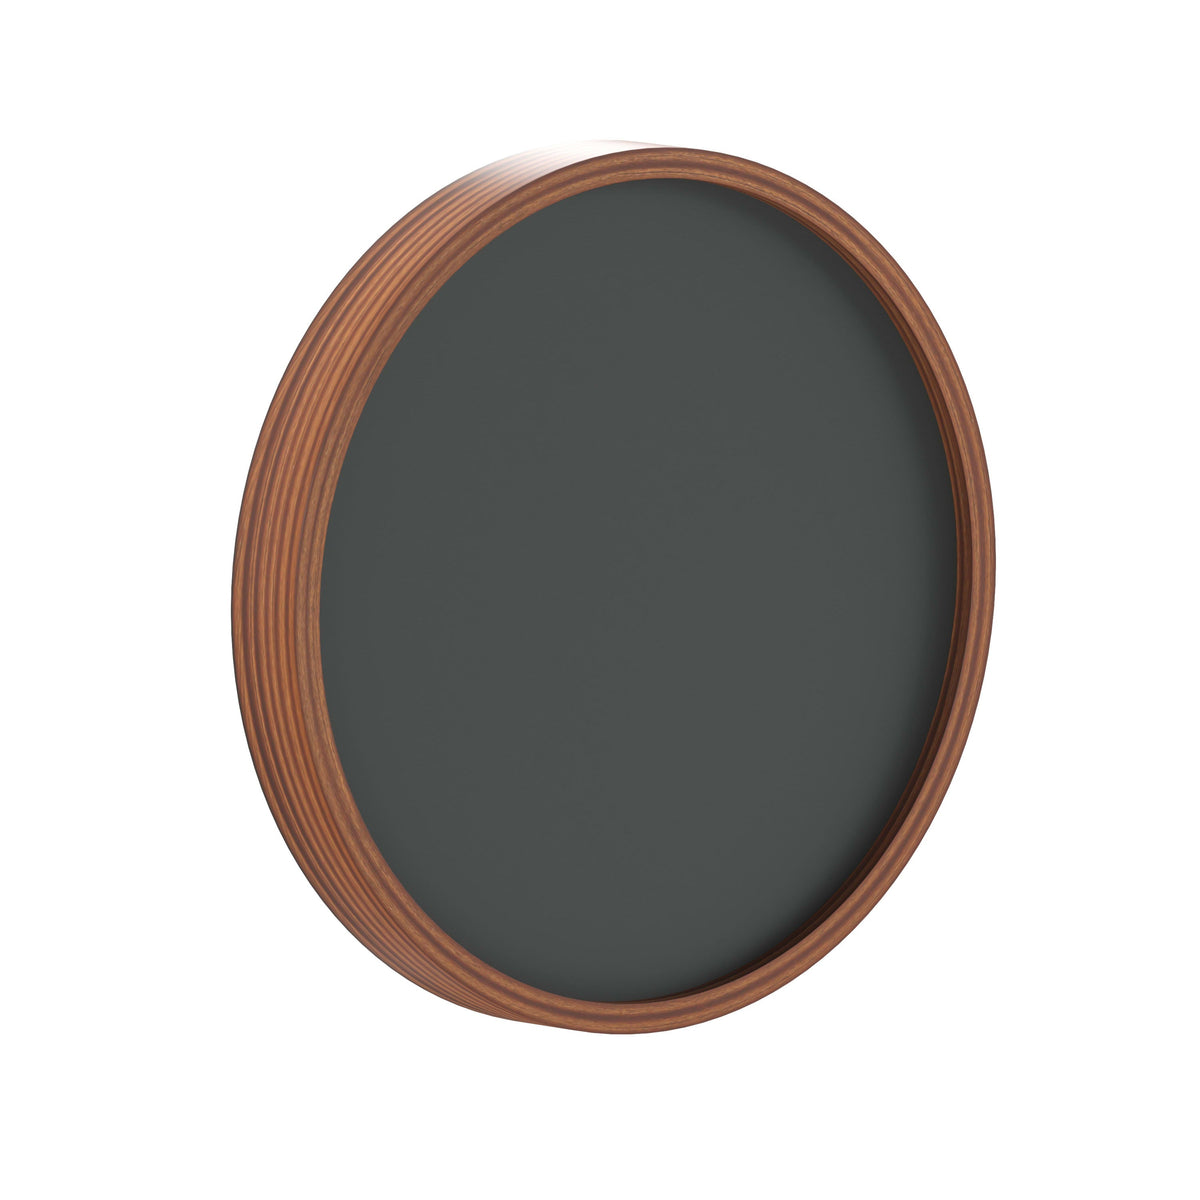 Rustic,12inch |#| Set of 2 Commercial Grade 12inch Round Rustic Framed Wall Mount Chalkboards